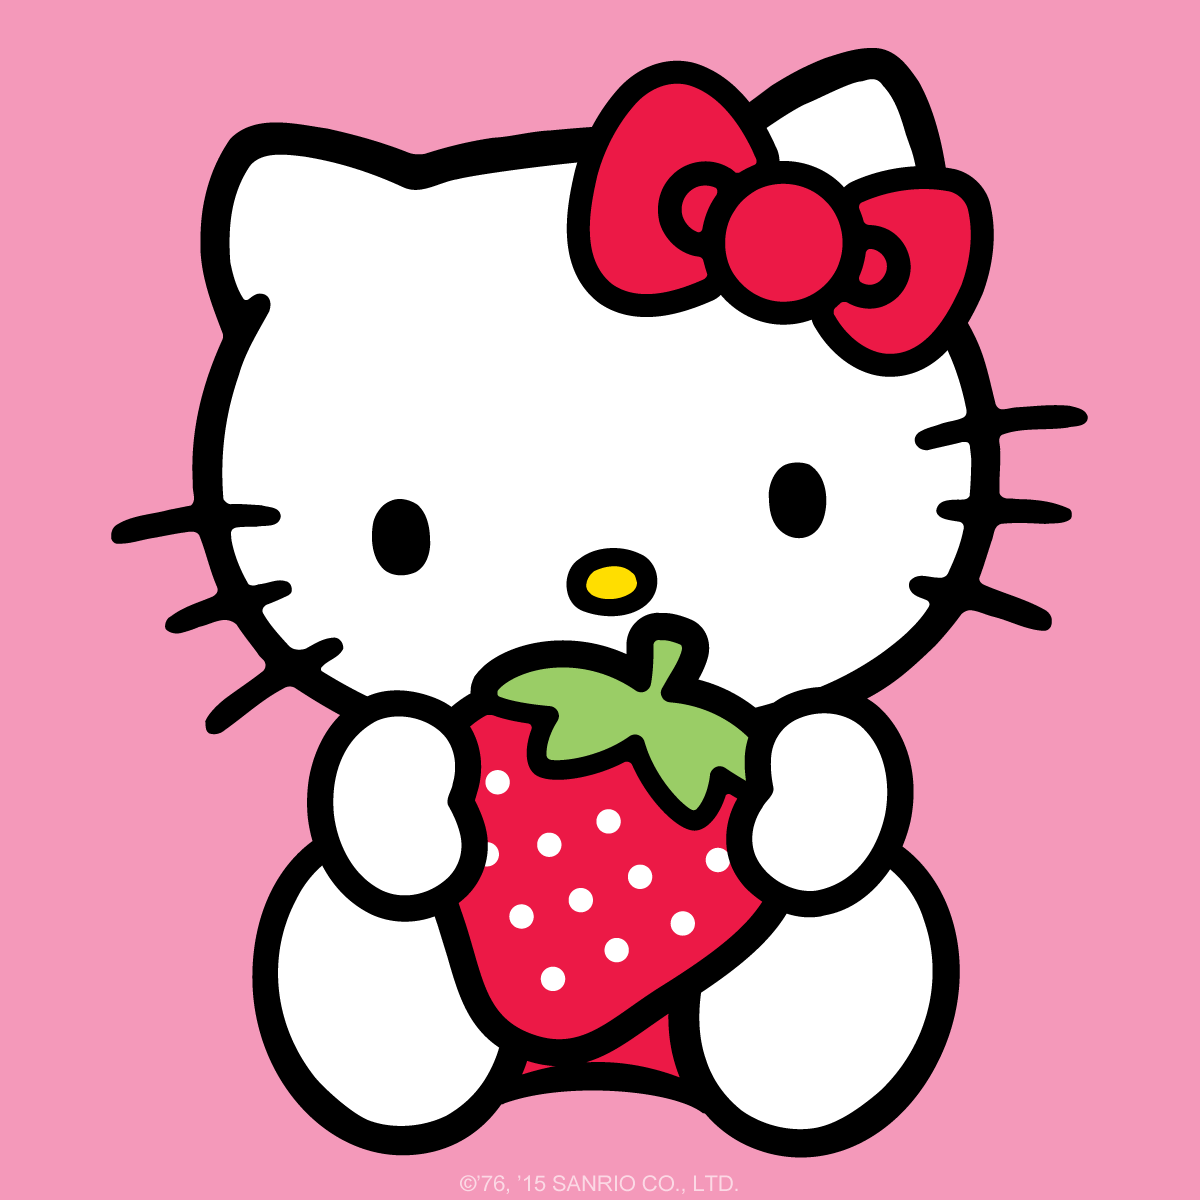 Hello Kitty lovely strawberry is the epitome of cuteness! Happy 'Pick Strawberries Day'!